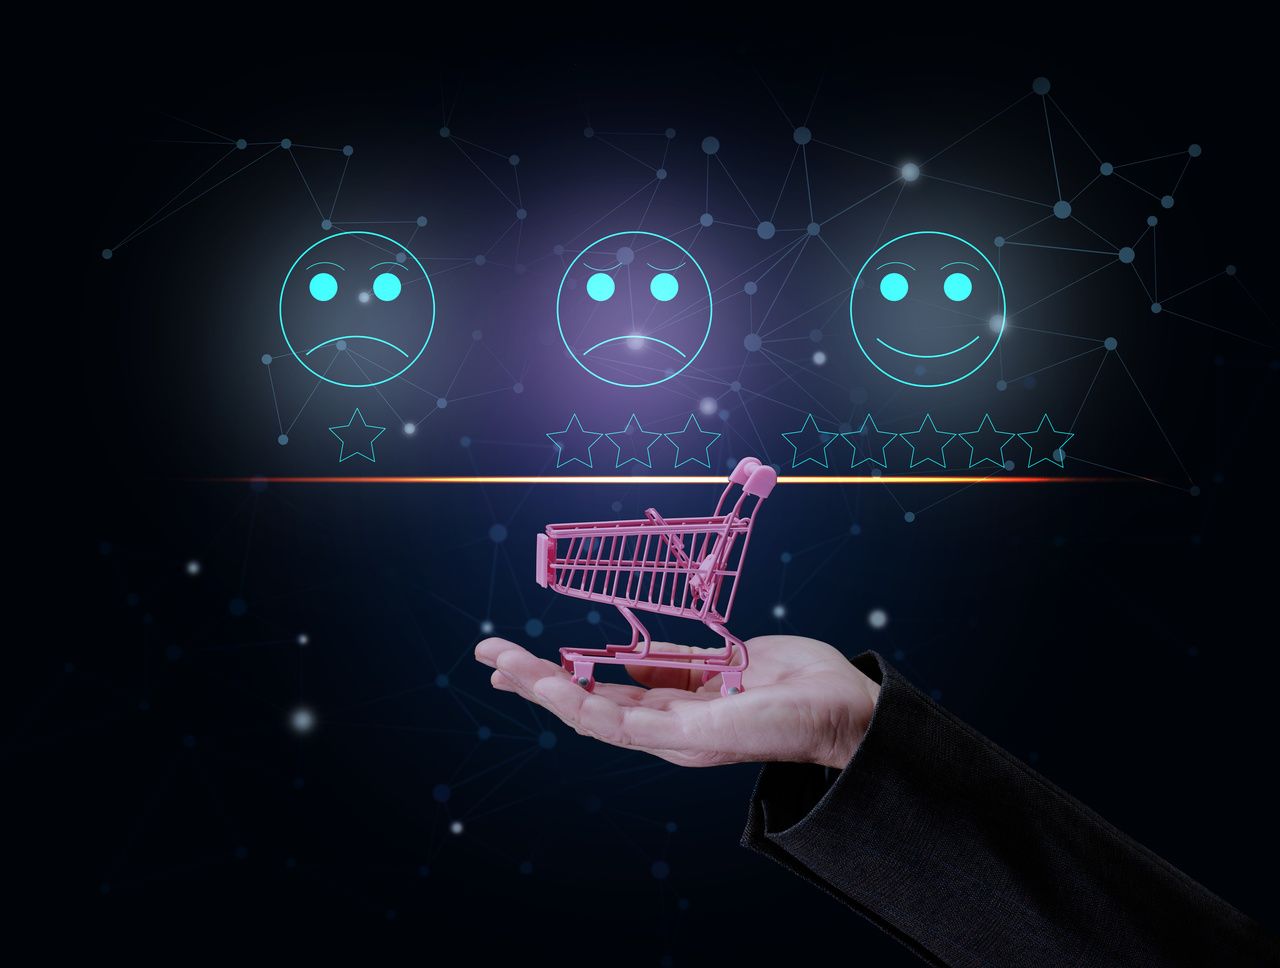 a hand holding a cart and the emojis from sad face to smiling face at the top on a shiny background